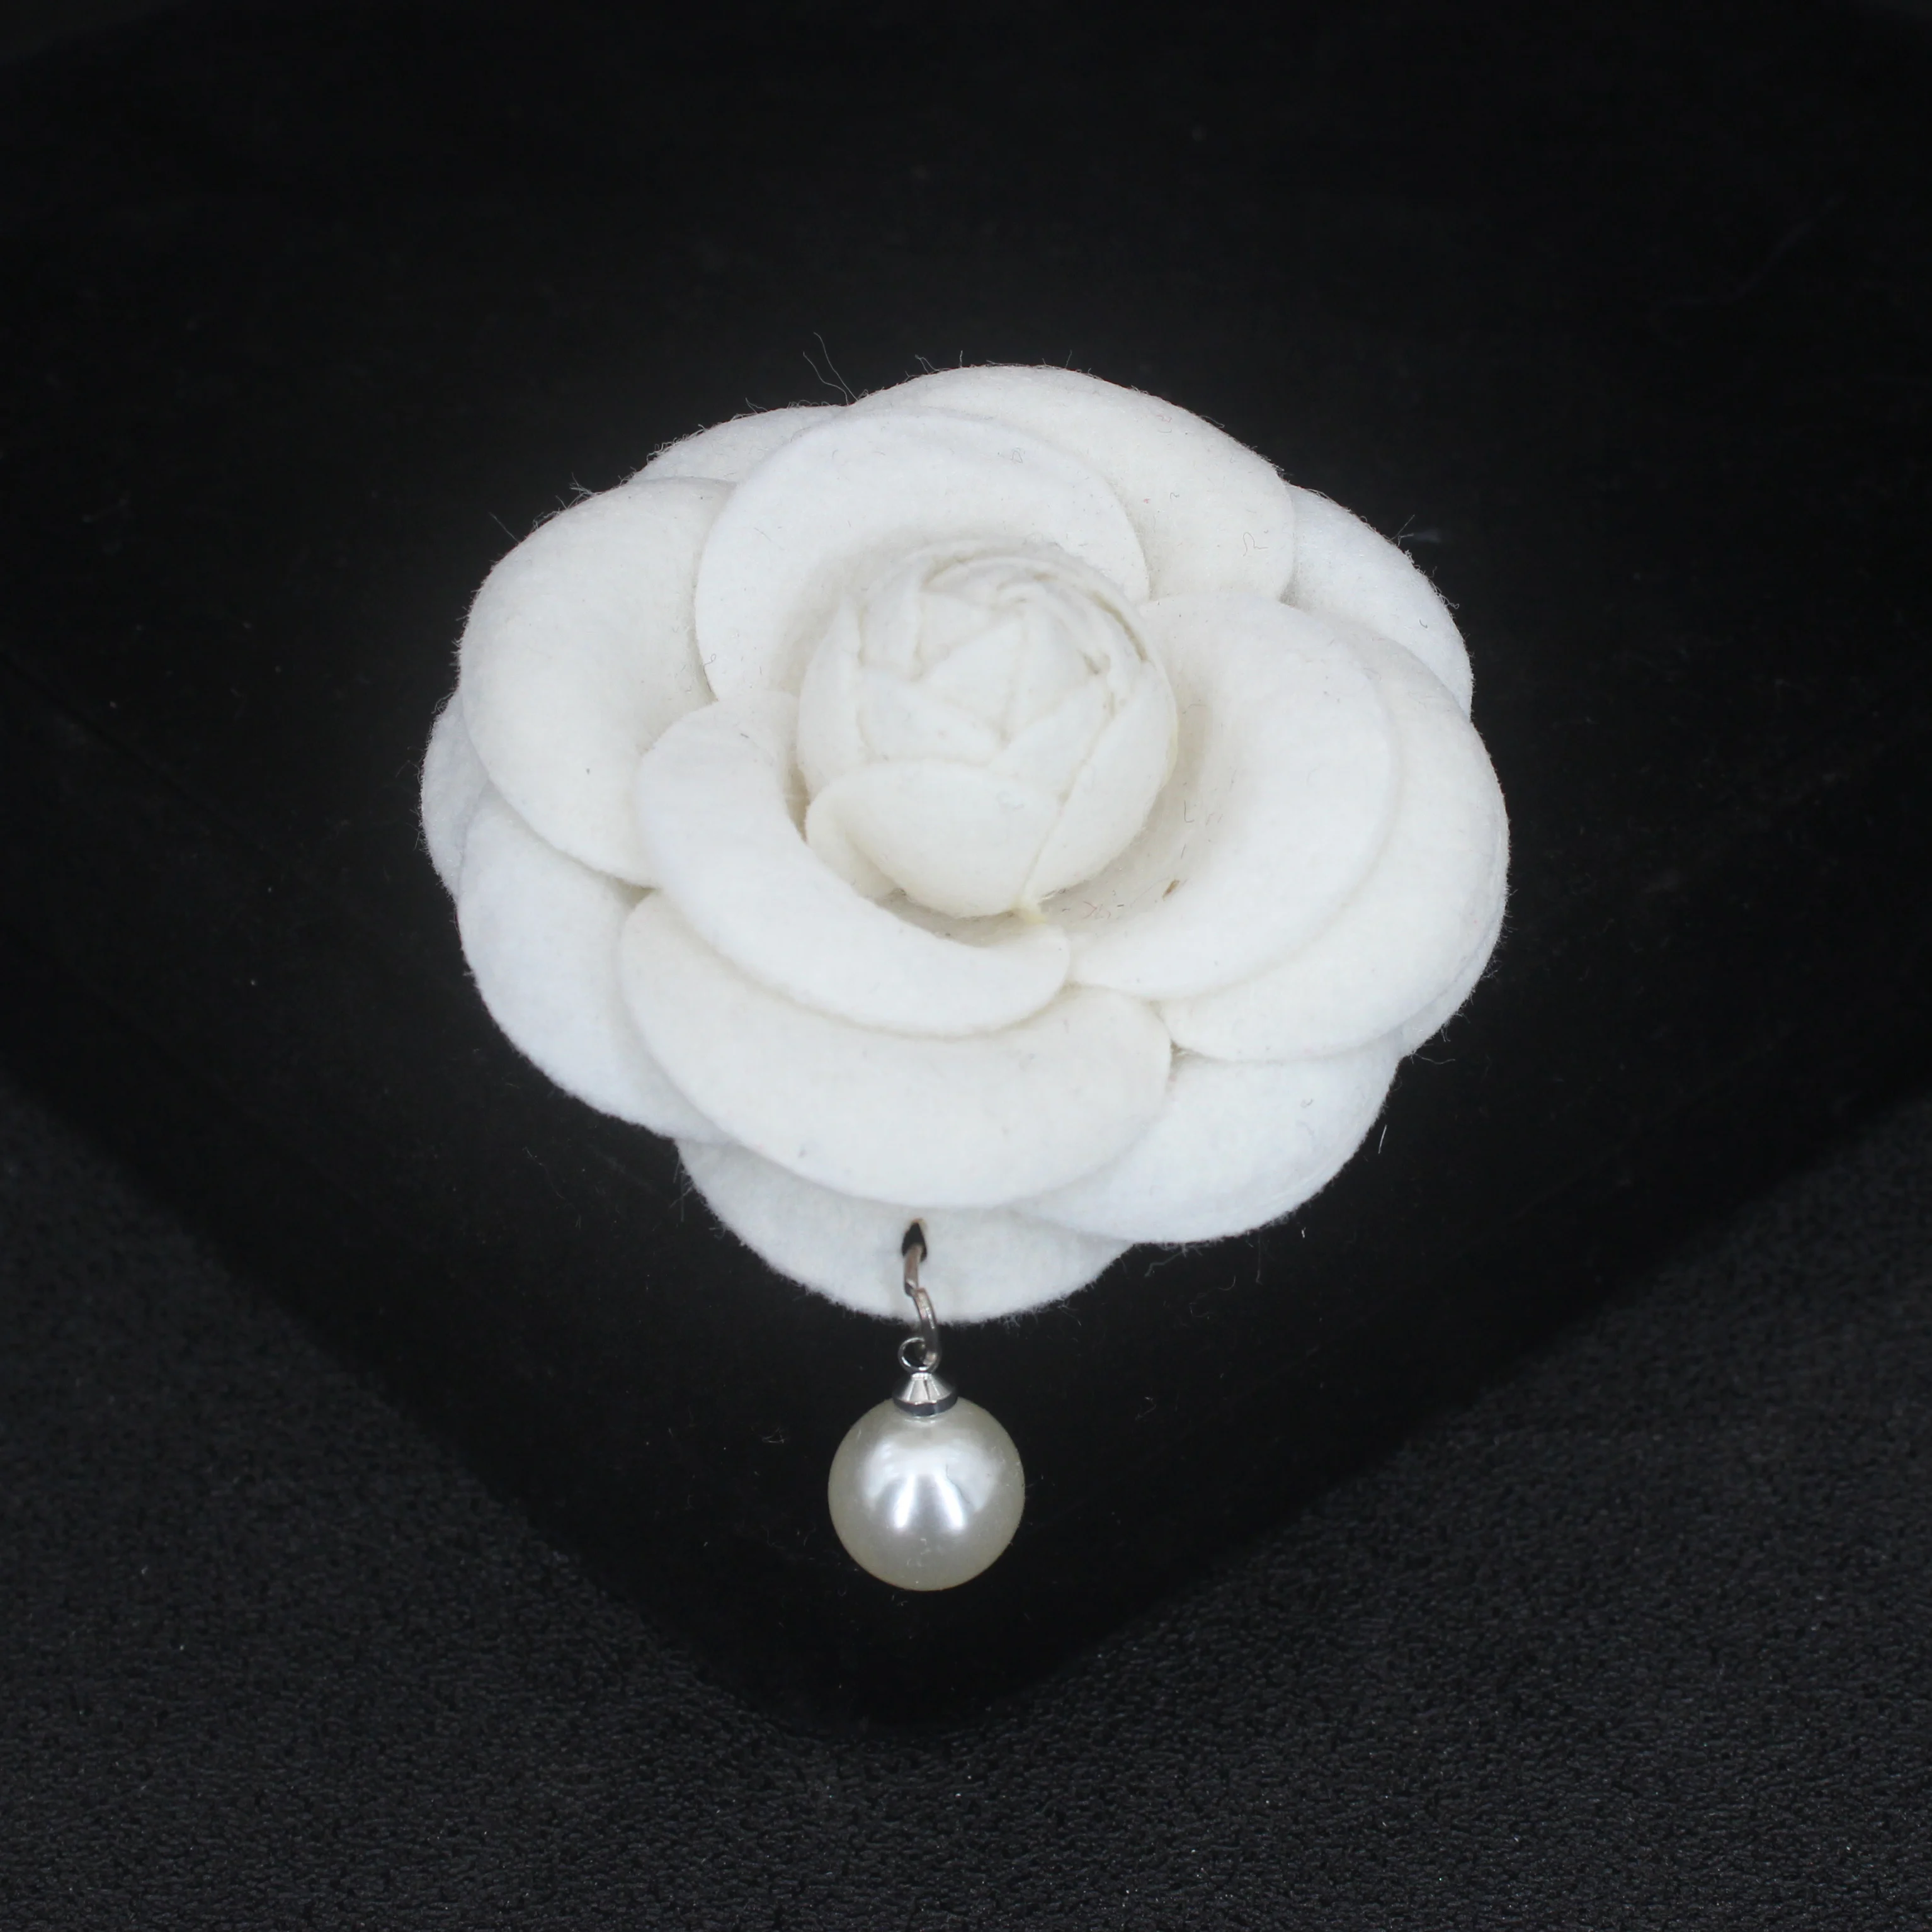 Korean Fabric Flower Brooch Pins Pearl Corsage Fashion Jewelry Wool  Brooches for Women Shirt Collar Accessories Gifts Dropship